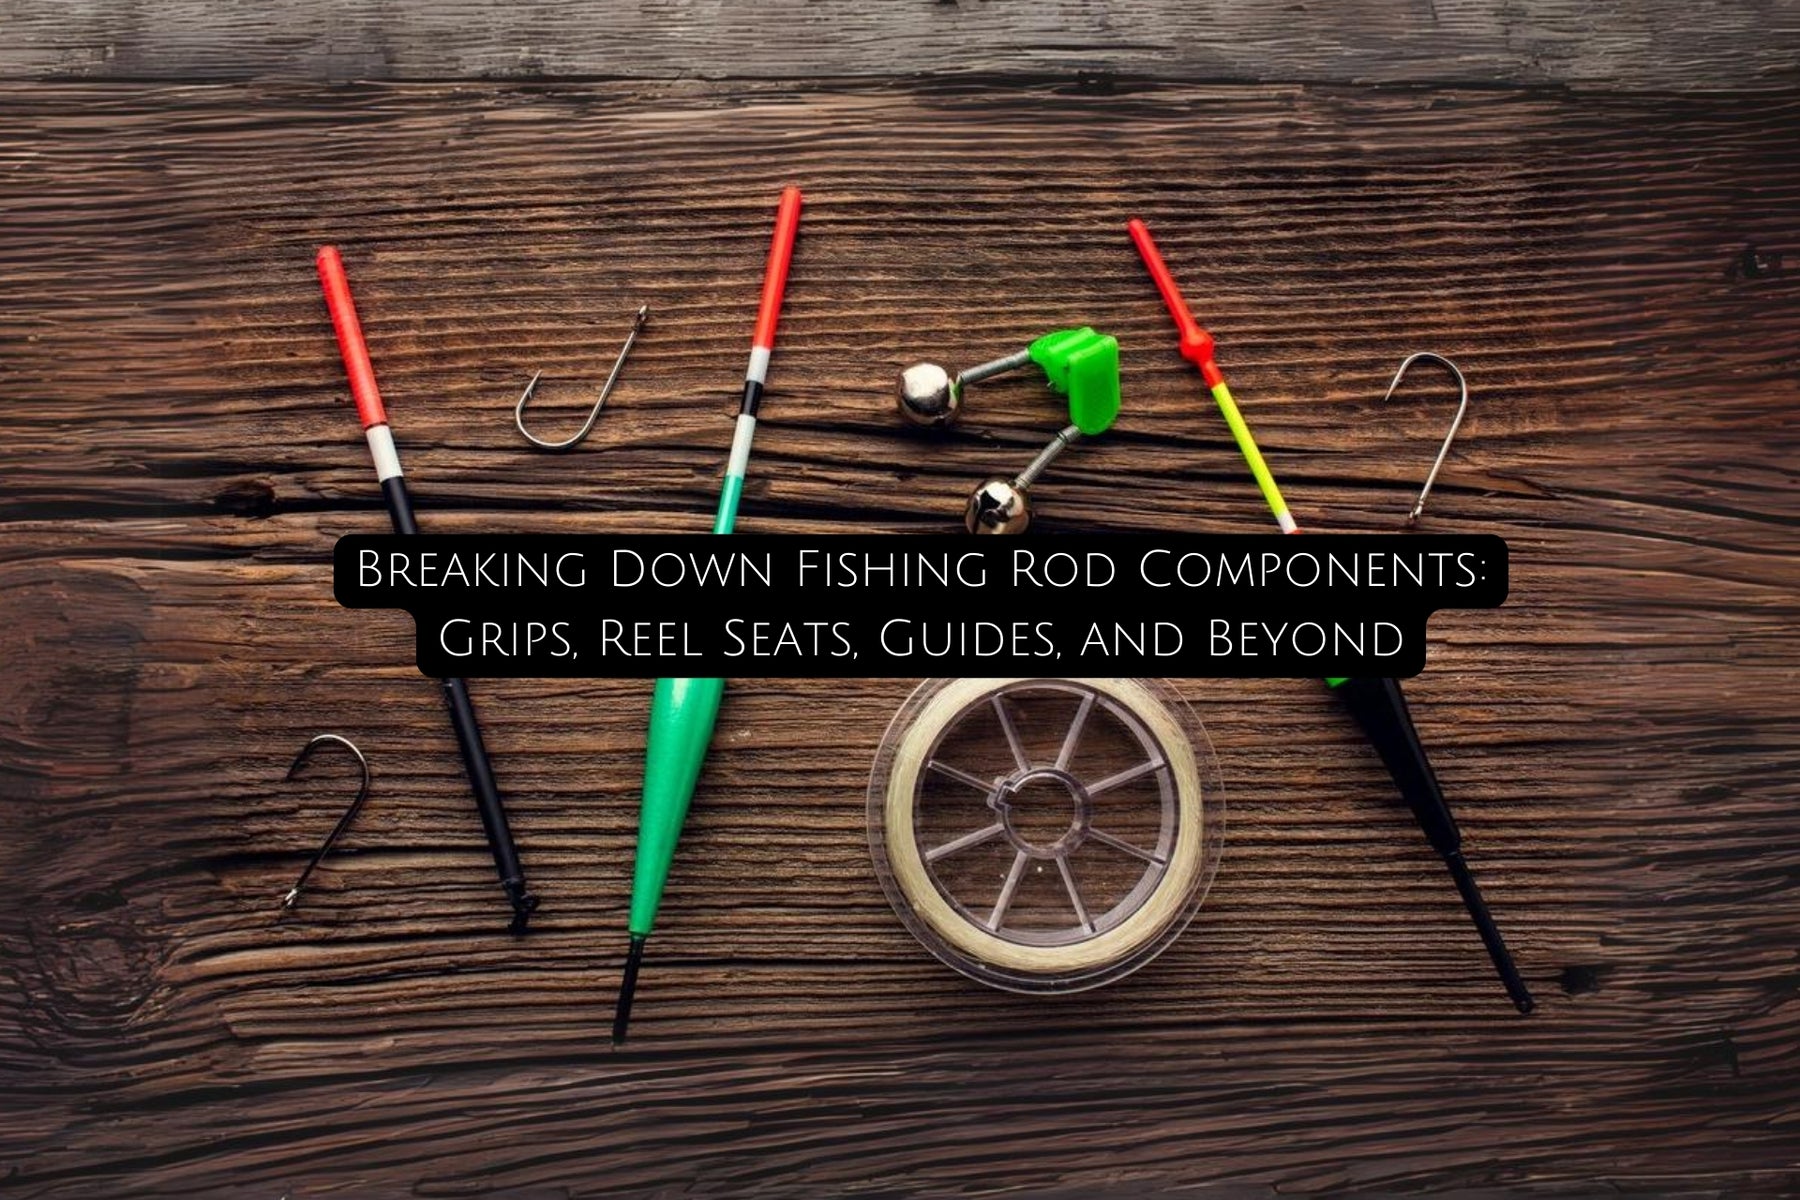 Breaking Down Fishing Rod Components: Grips, Reel Seats, Guides, and Beyond